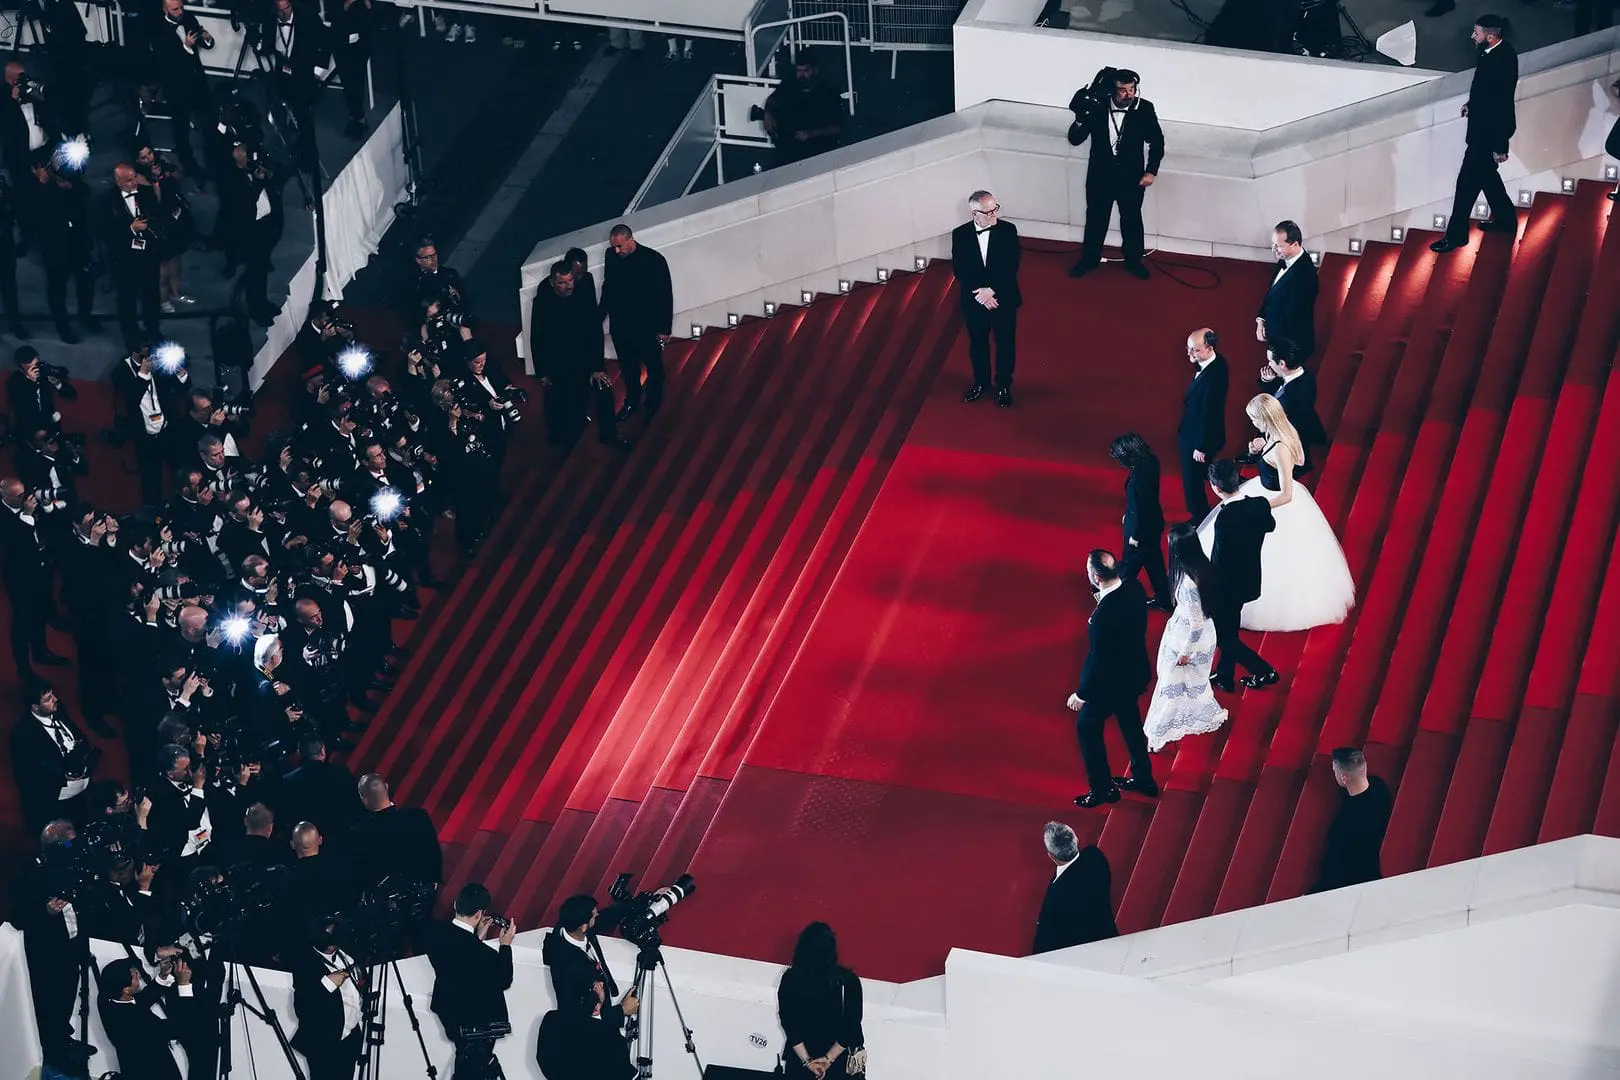 History of the Cannes Film Festival